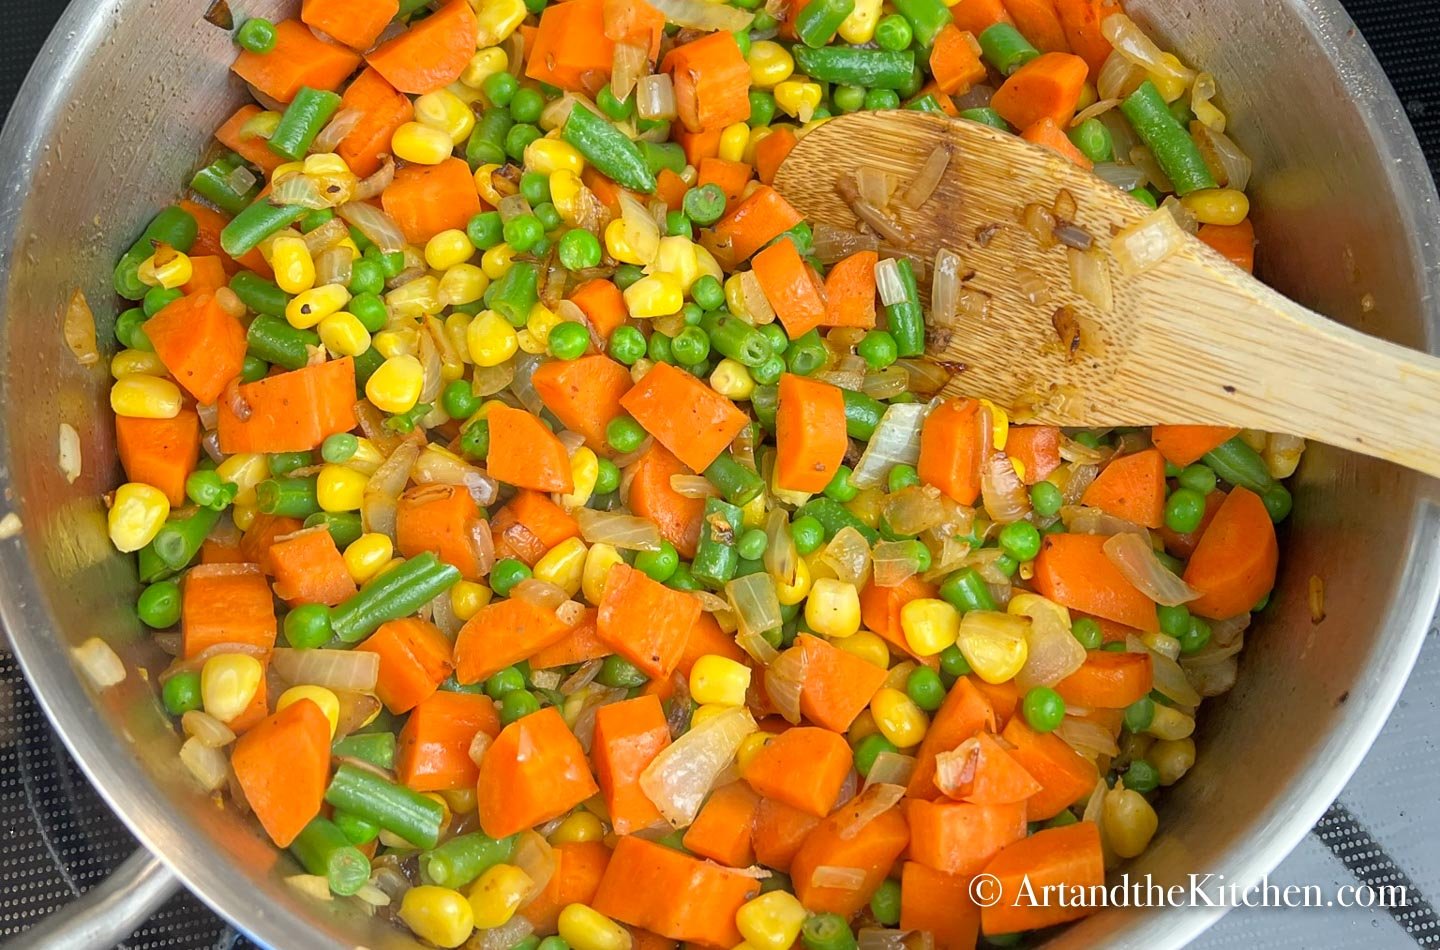 Stainless steel skillet filled with cooked carrots, green beans, peas and onions. Wooden spoon stirring mixture.